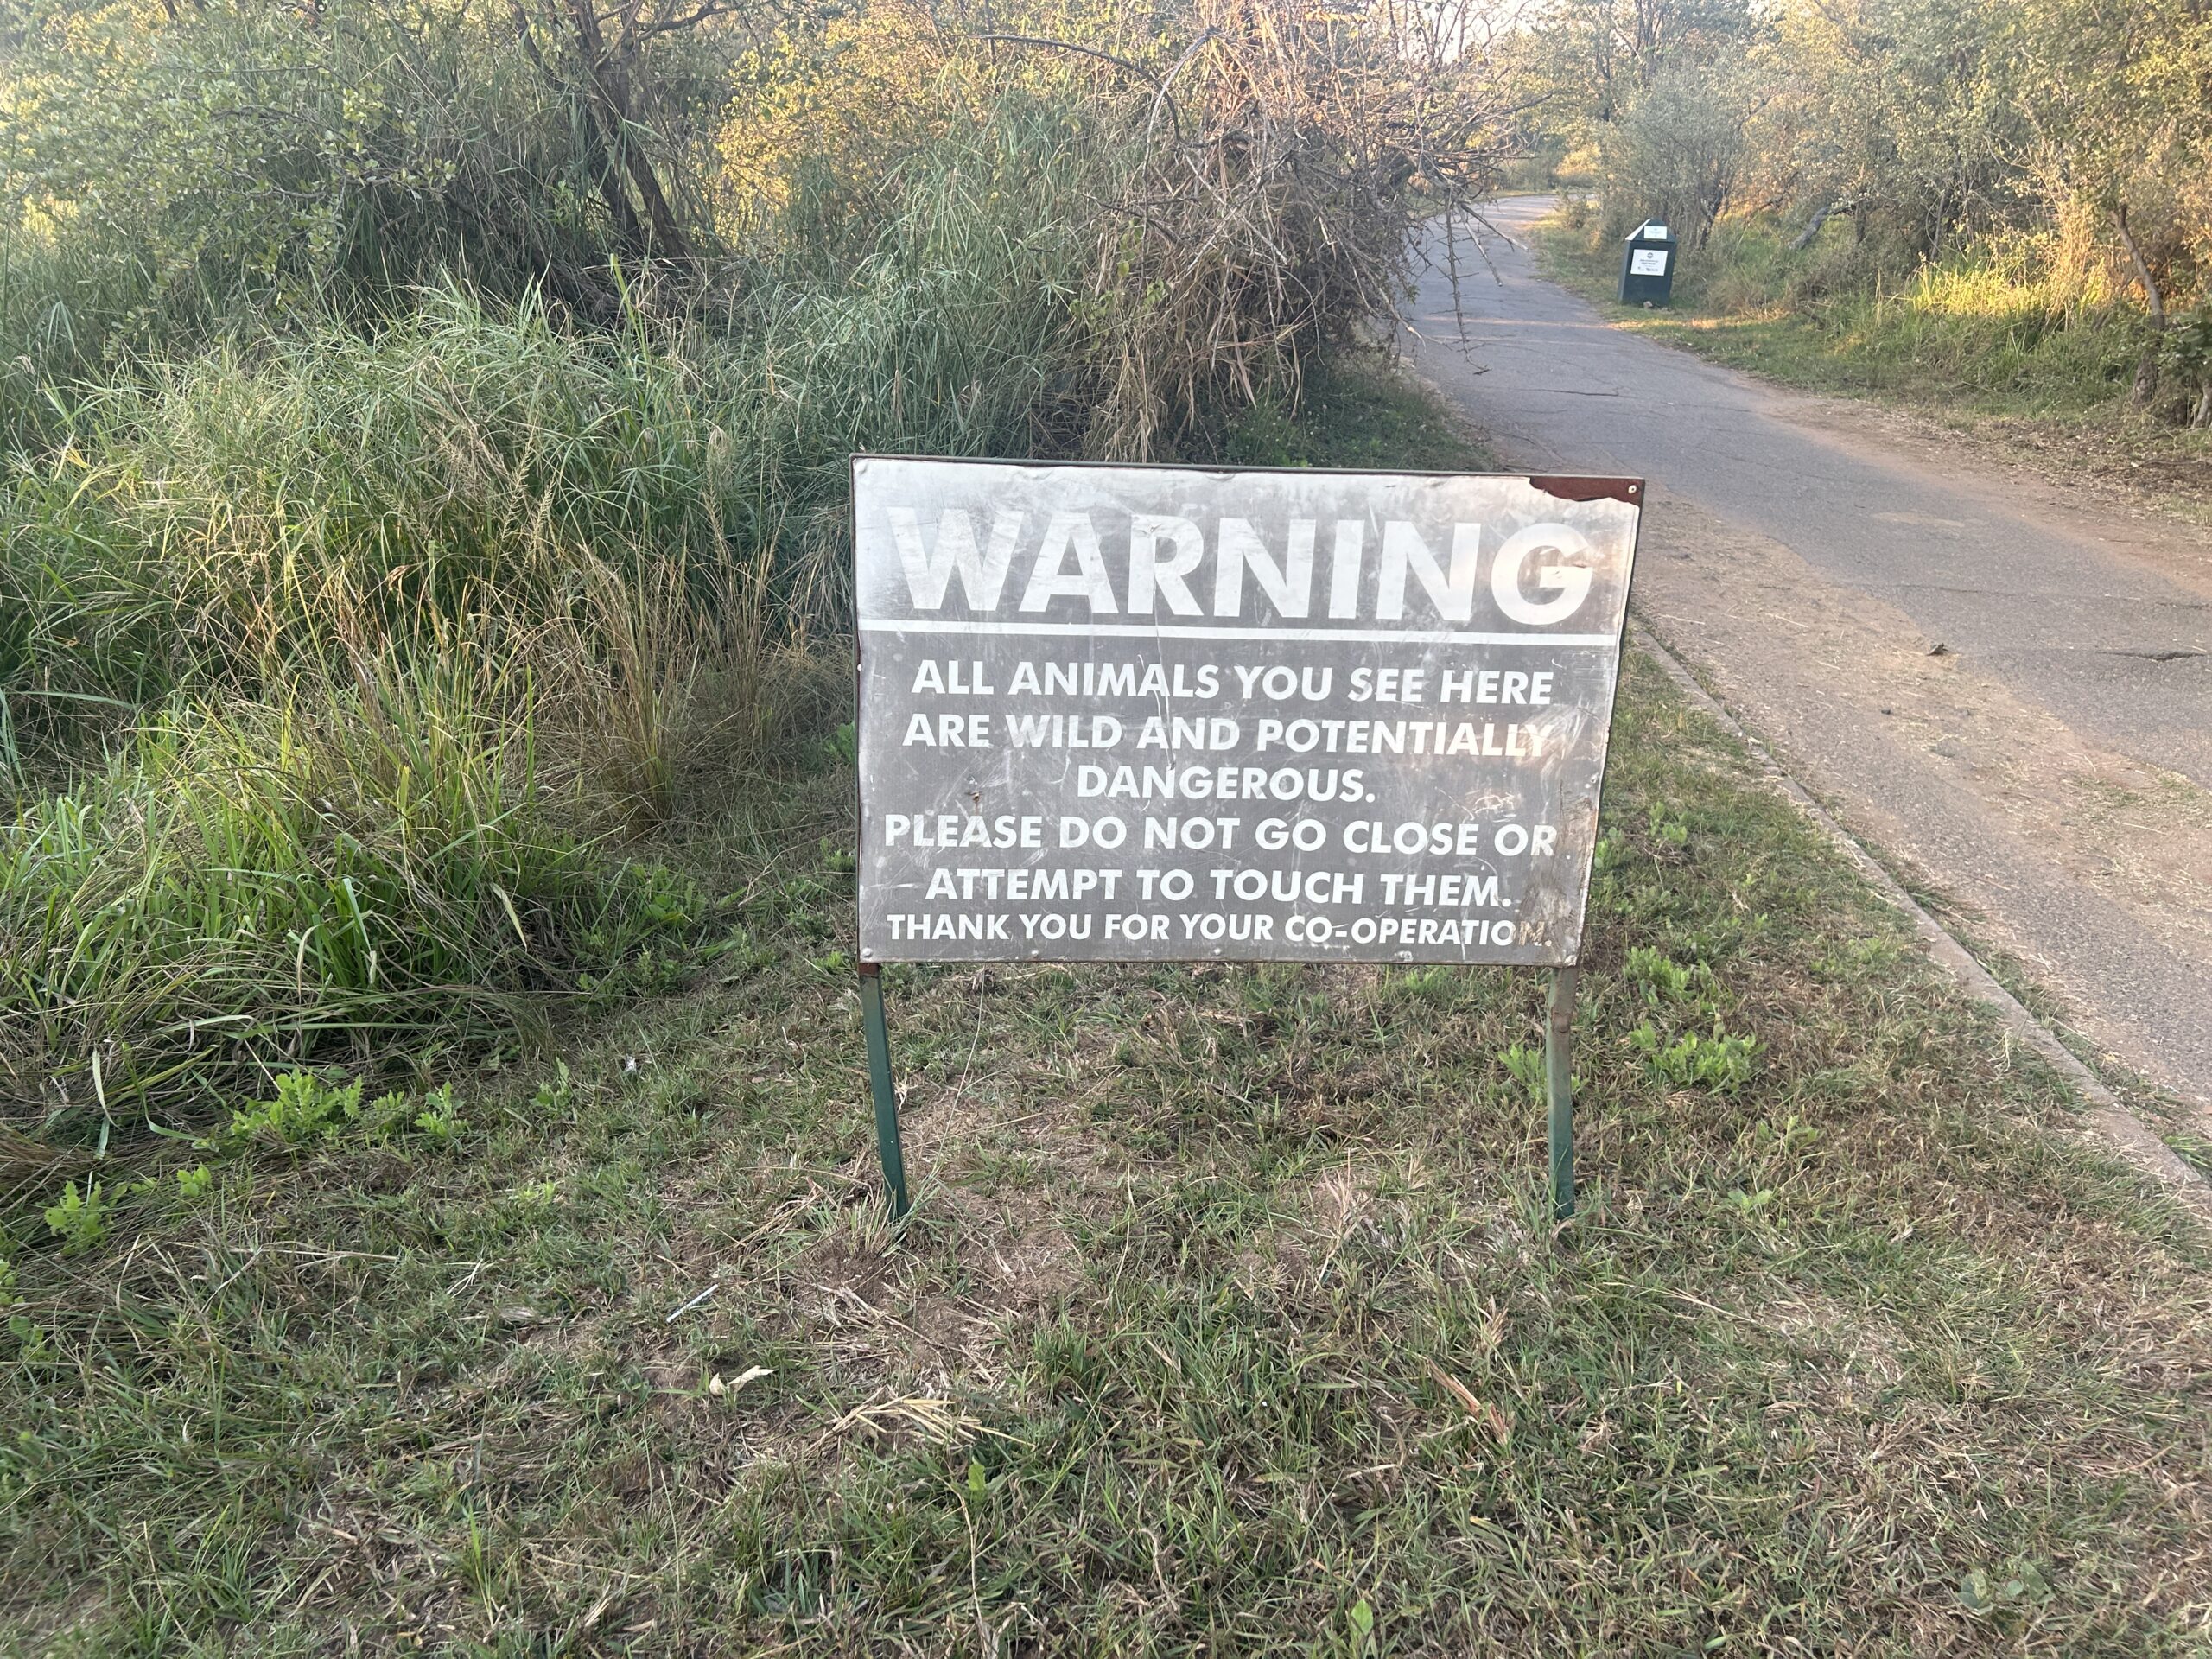 Sign on the side of the road: WARNING - all animals you see here are wild and potentially dangerous. Please do not go close or attempt to touch them. Thank you for co-operation. 